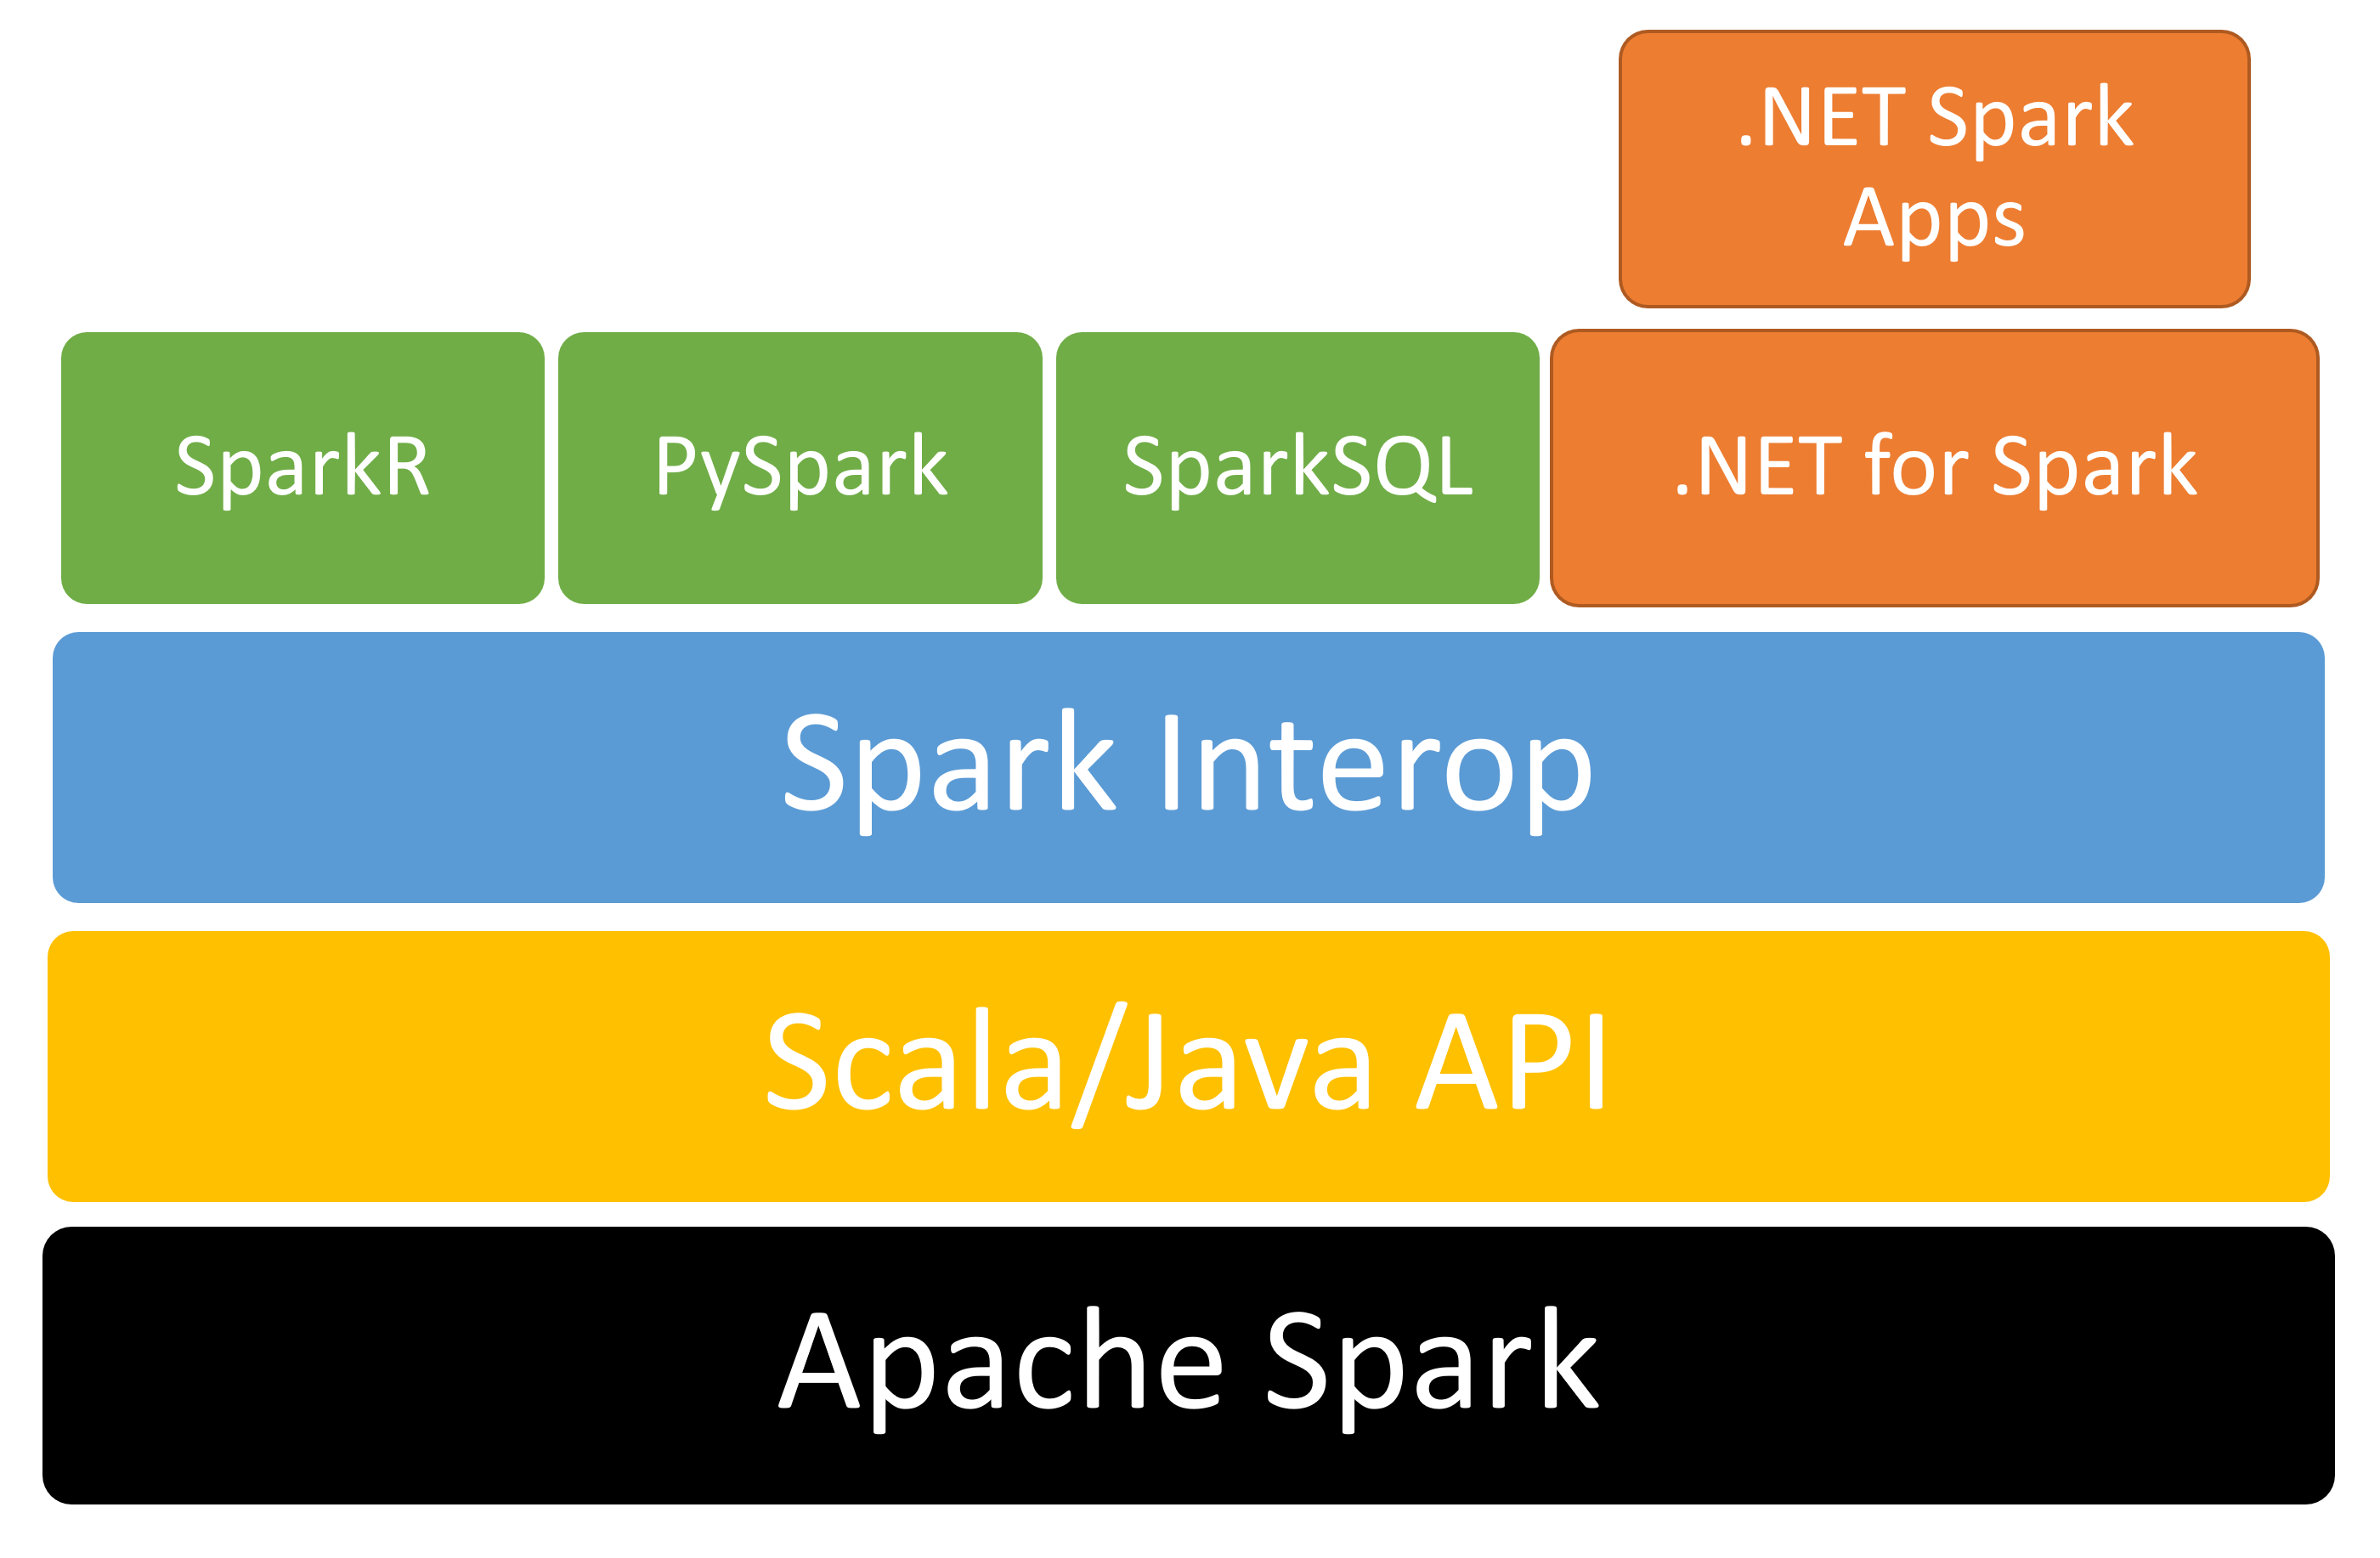 Figure 2: Architecture for .NET for Spark